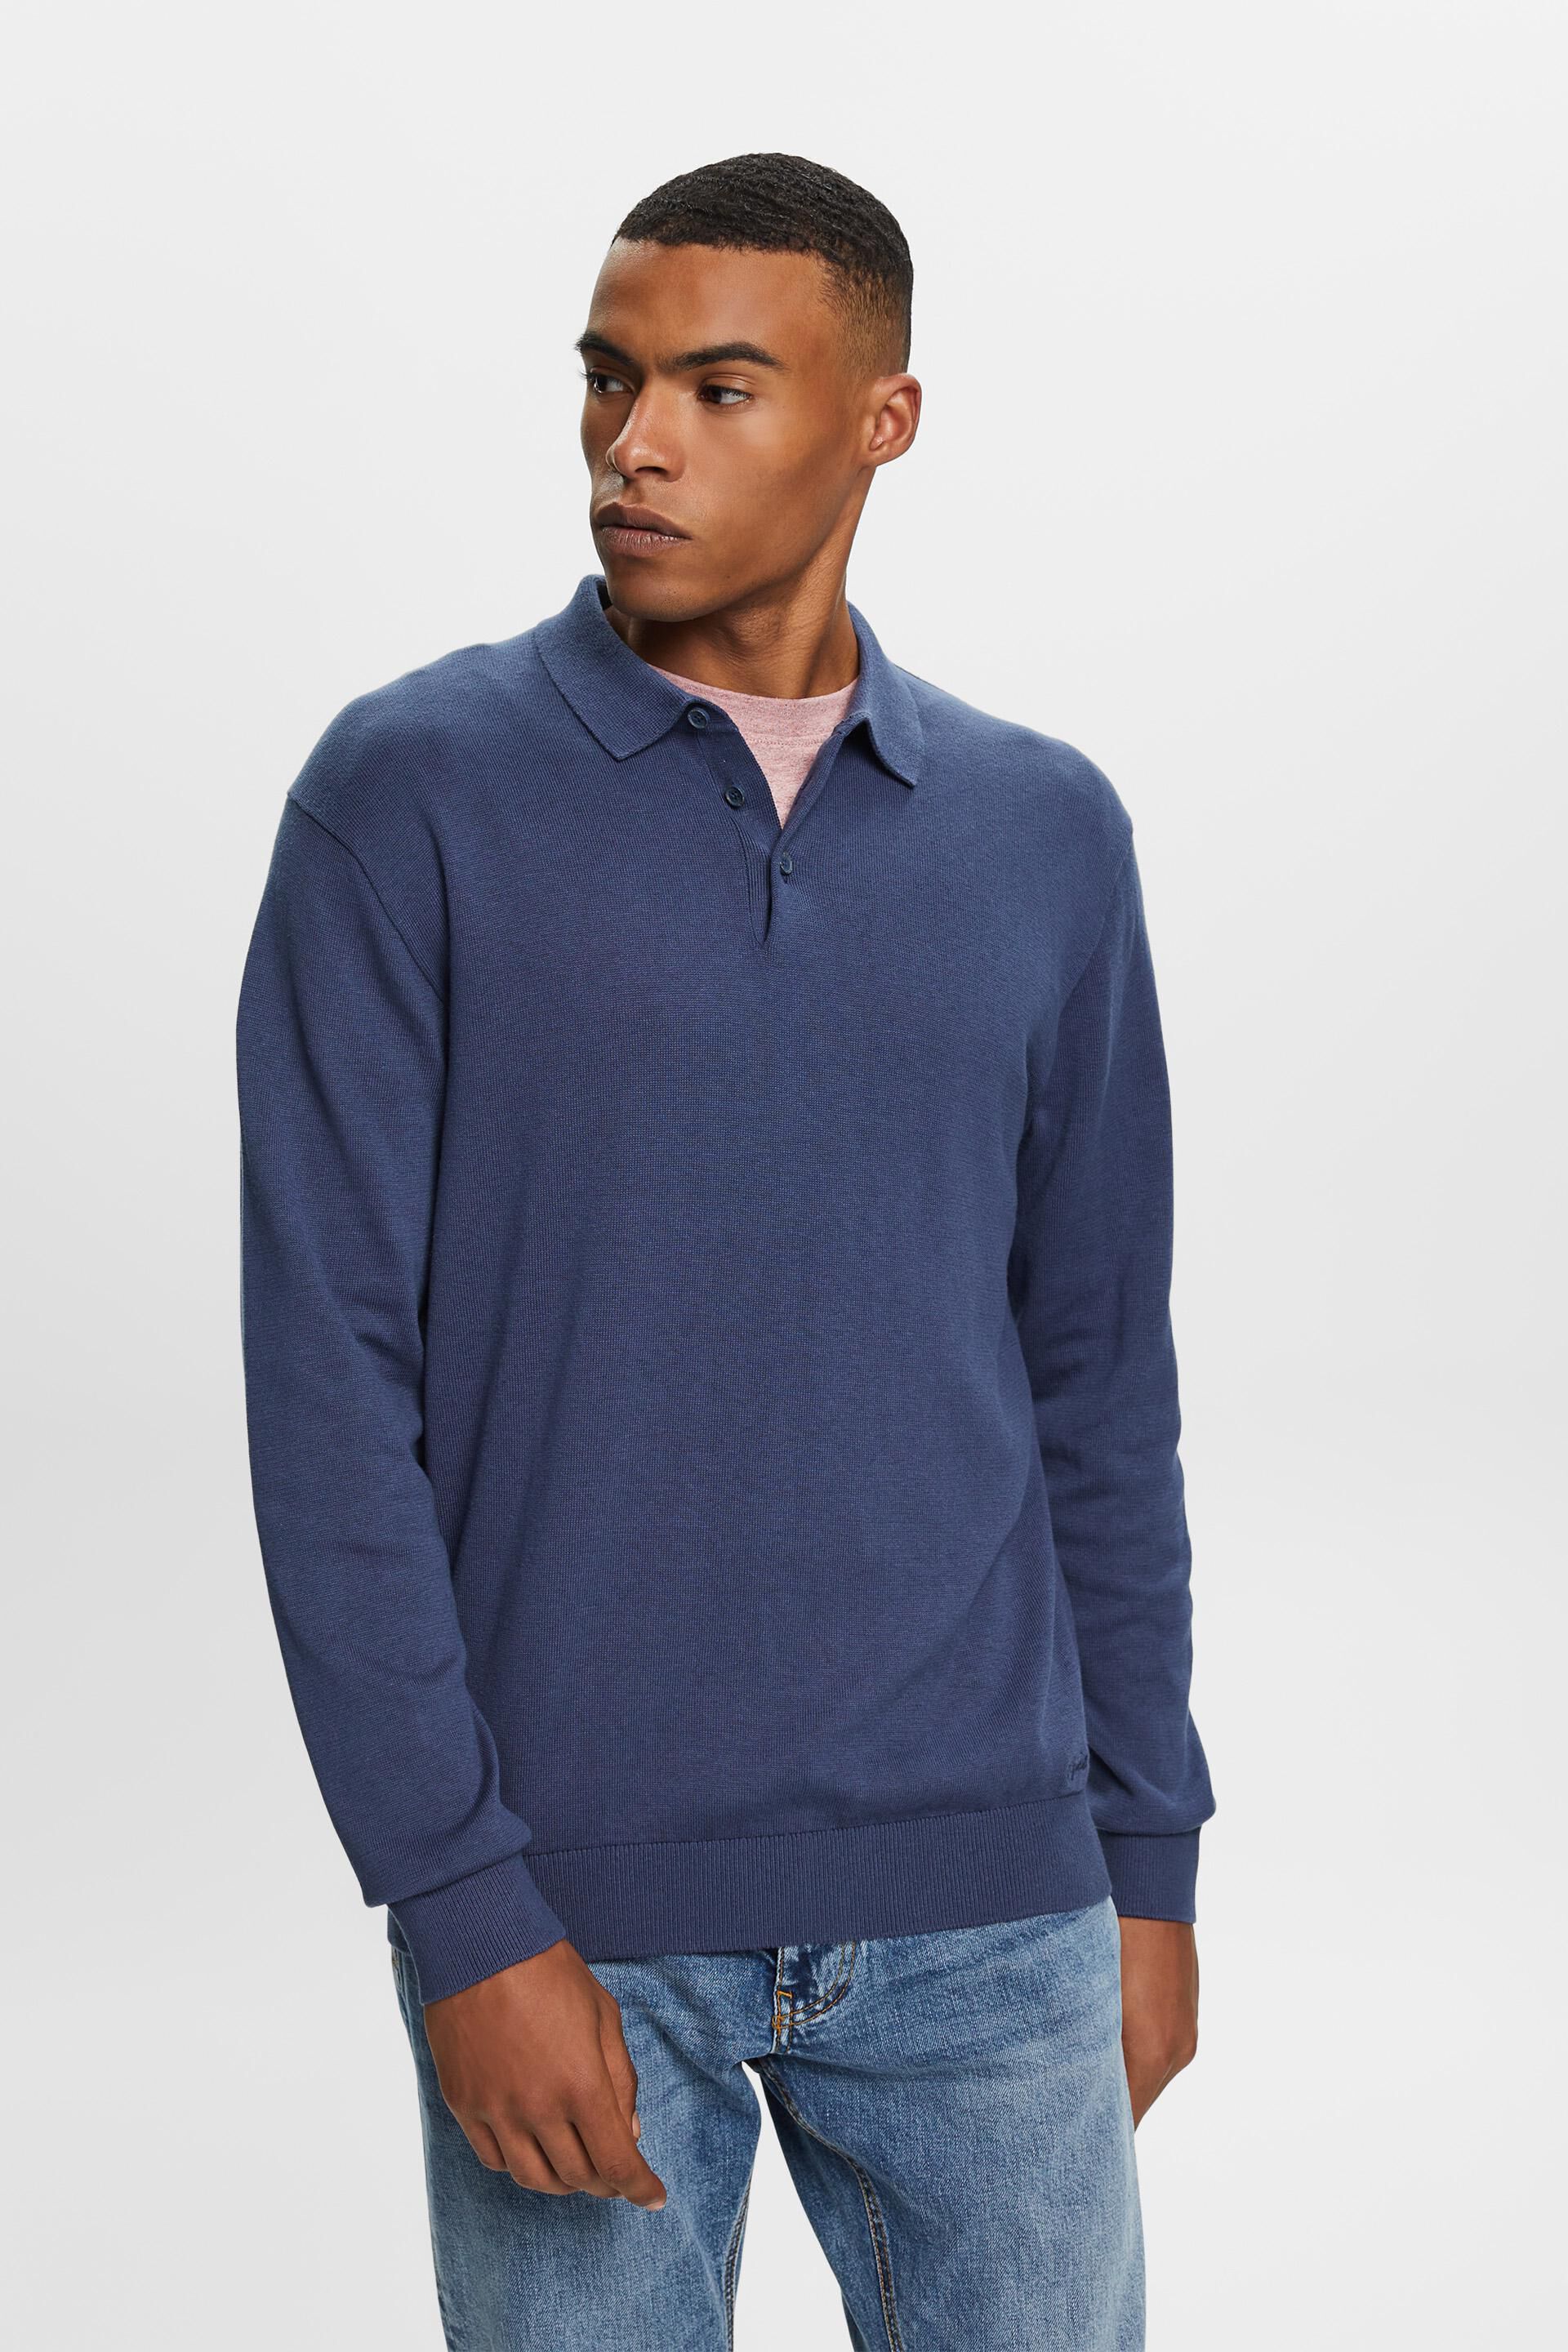 Esprit collar, jumper polo TENCEL™ with Knit a